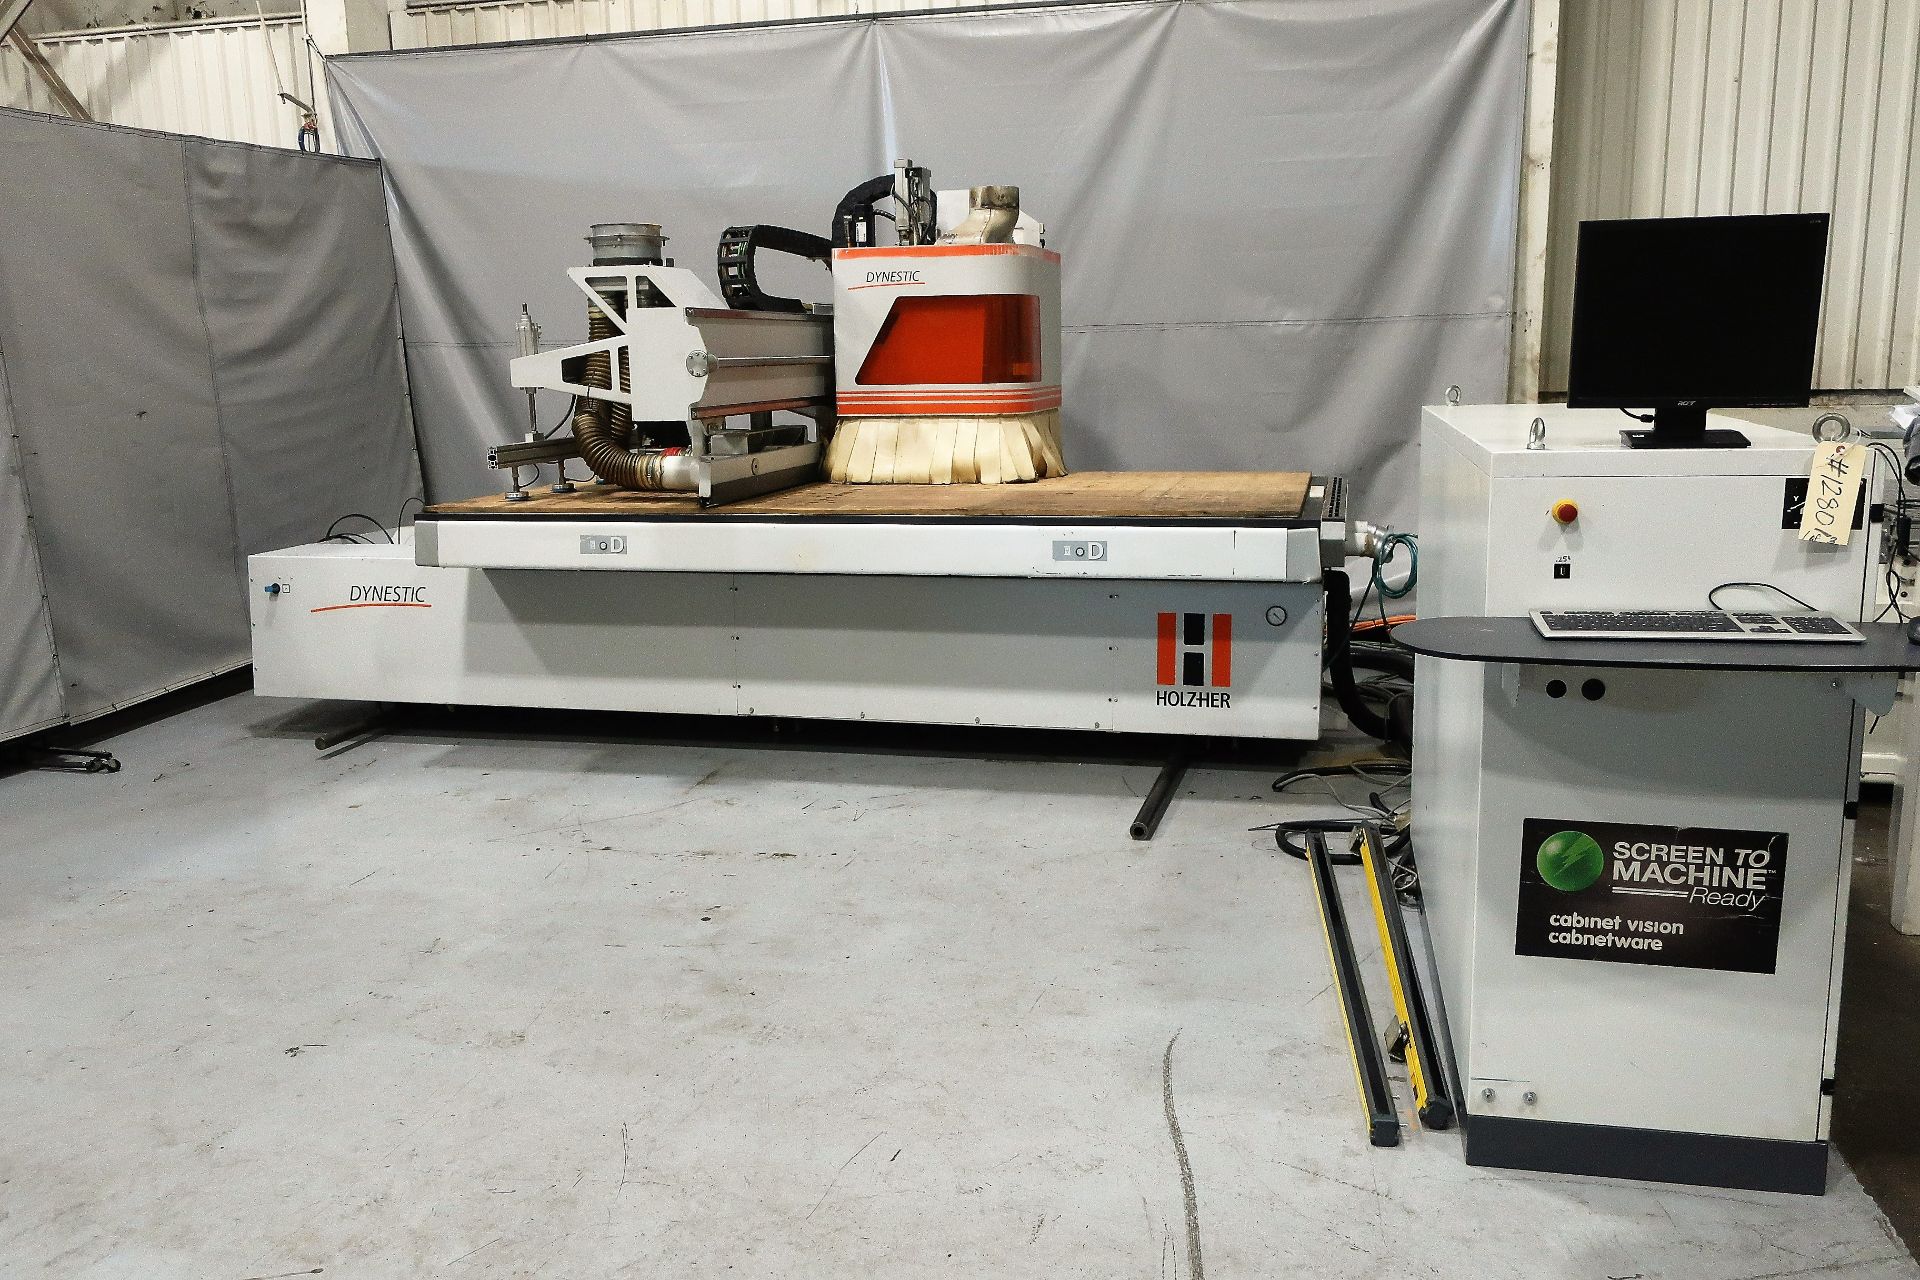 Holzher Model Dynestic 7516 5'x10' CNC Router, S/N 27/1-102, New 2011